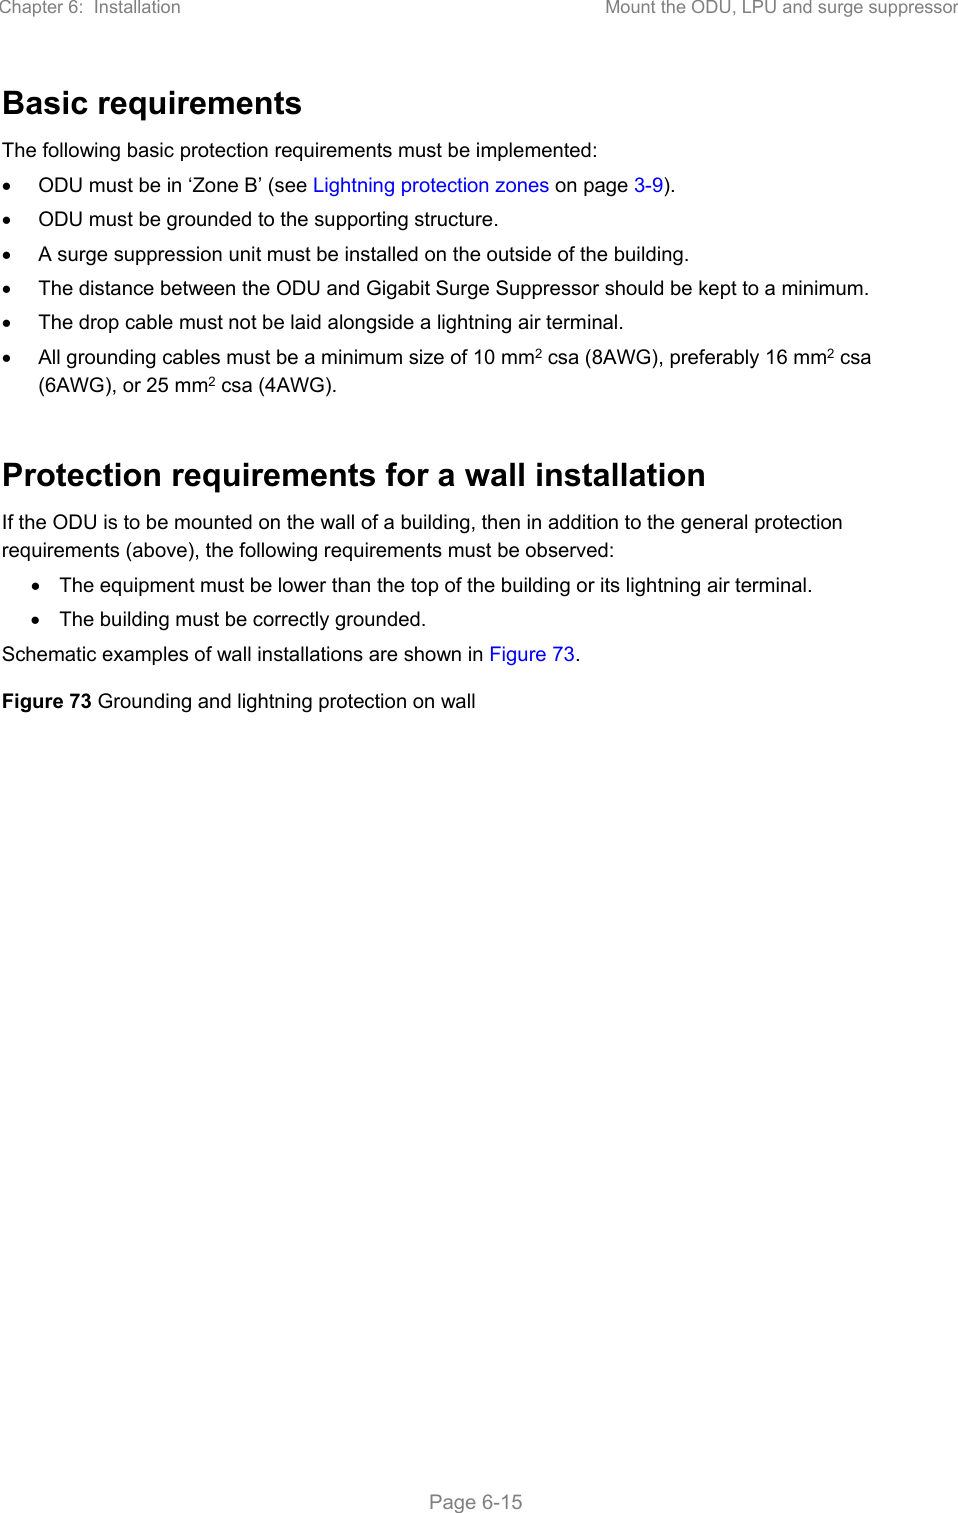 Chapter 6:  Installation  Mount the ODU, LPU and surge suppressor   Page 6-15 Basic requirements The following basic protection requirements must be implemented:   ODU must be in ‘Zone B’ (see Lightning protection zones on page 3-9).   ODU must be grounded to the supporting structure.   A surge suppression unit must be installed on the outside of the building.   The distance between the ODU and Gigabit Surge Suppressor should be kept to a minimum.   The drop cable must not be laid alongside a lightning air terminal.   All grounding cables must be a minimum size of 10 mm2 csa (8AWG), preferably 16 mm2 csa (6AWG), or 25 mm2 csa (4AWG).  Protection requirements for a wall installation If the ODU is to be mounted on the wall of a building, then in addition to the general protection requirements (above), the following requirements must be observed:   The equipment must be lower than the top of the building or its lightning air terminal.   The building must be correctly grounded. Schematic examples of wall installations are shown in Figure 73. Figure 73 Grounding and lightning protection on wall   